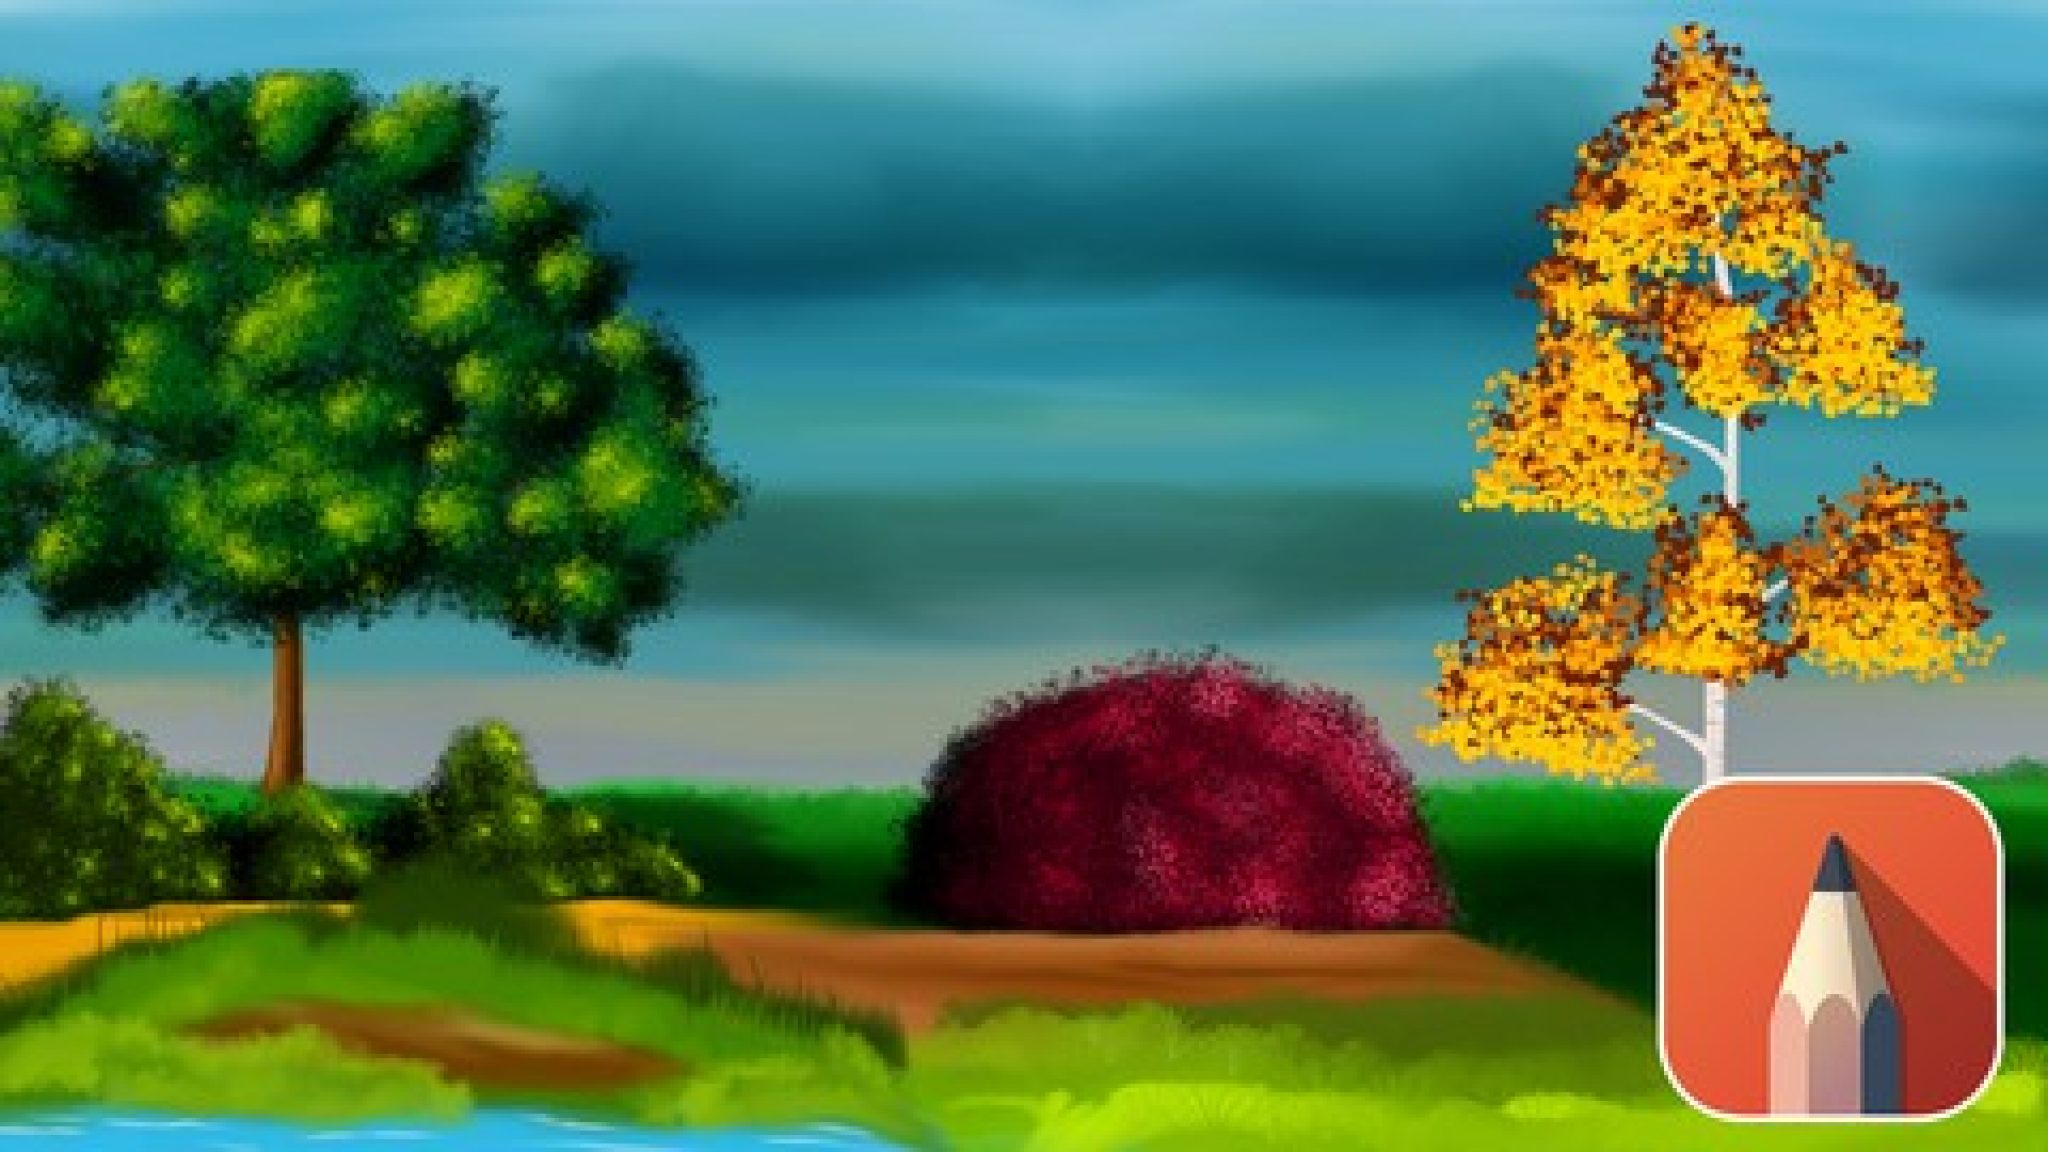 painting with autodesk sketchbook